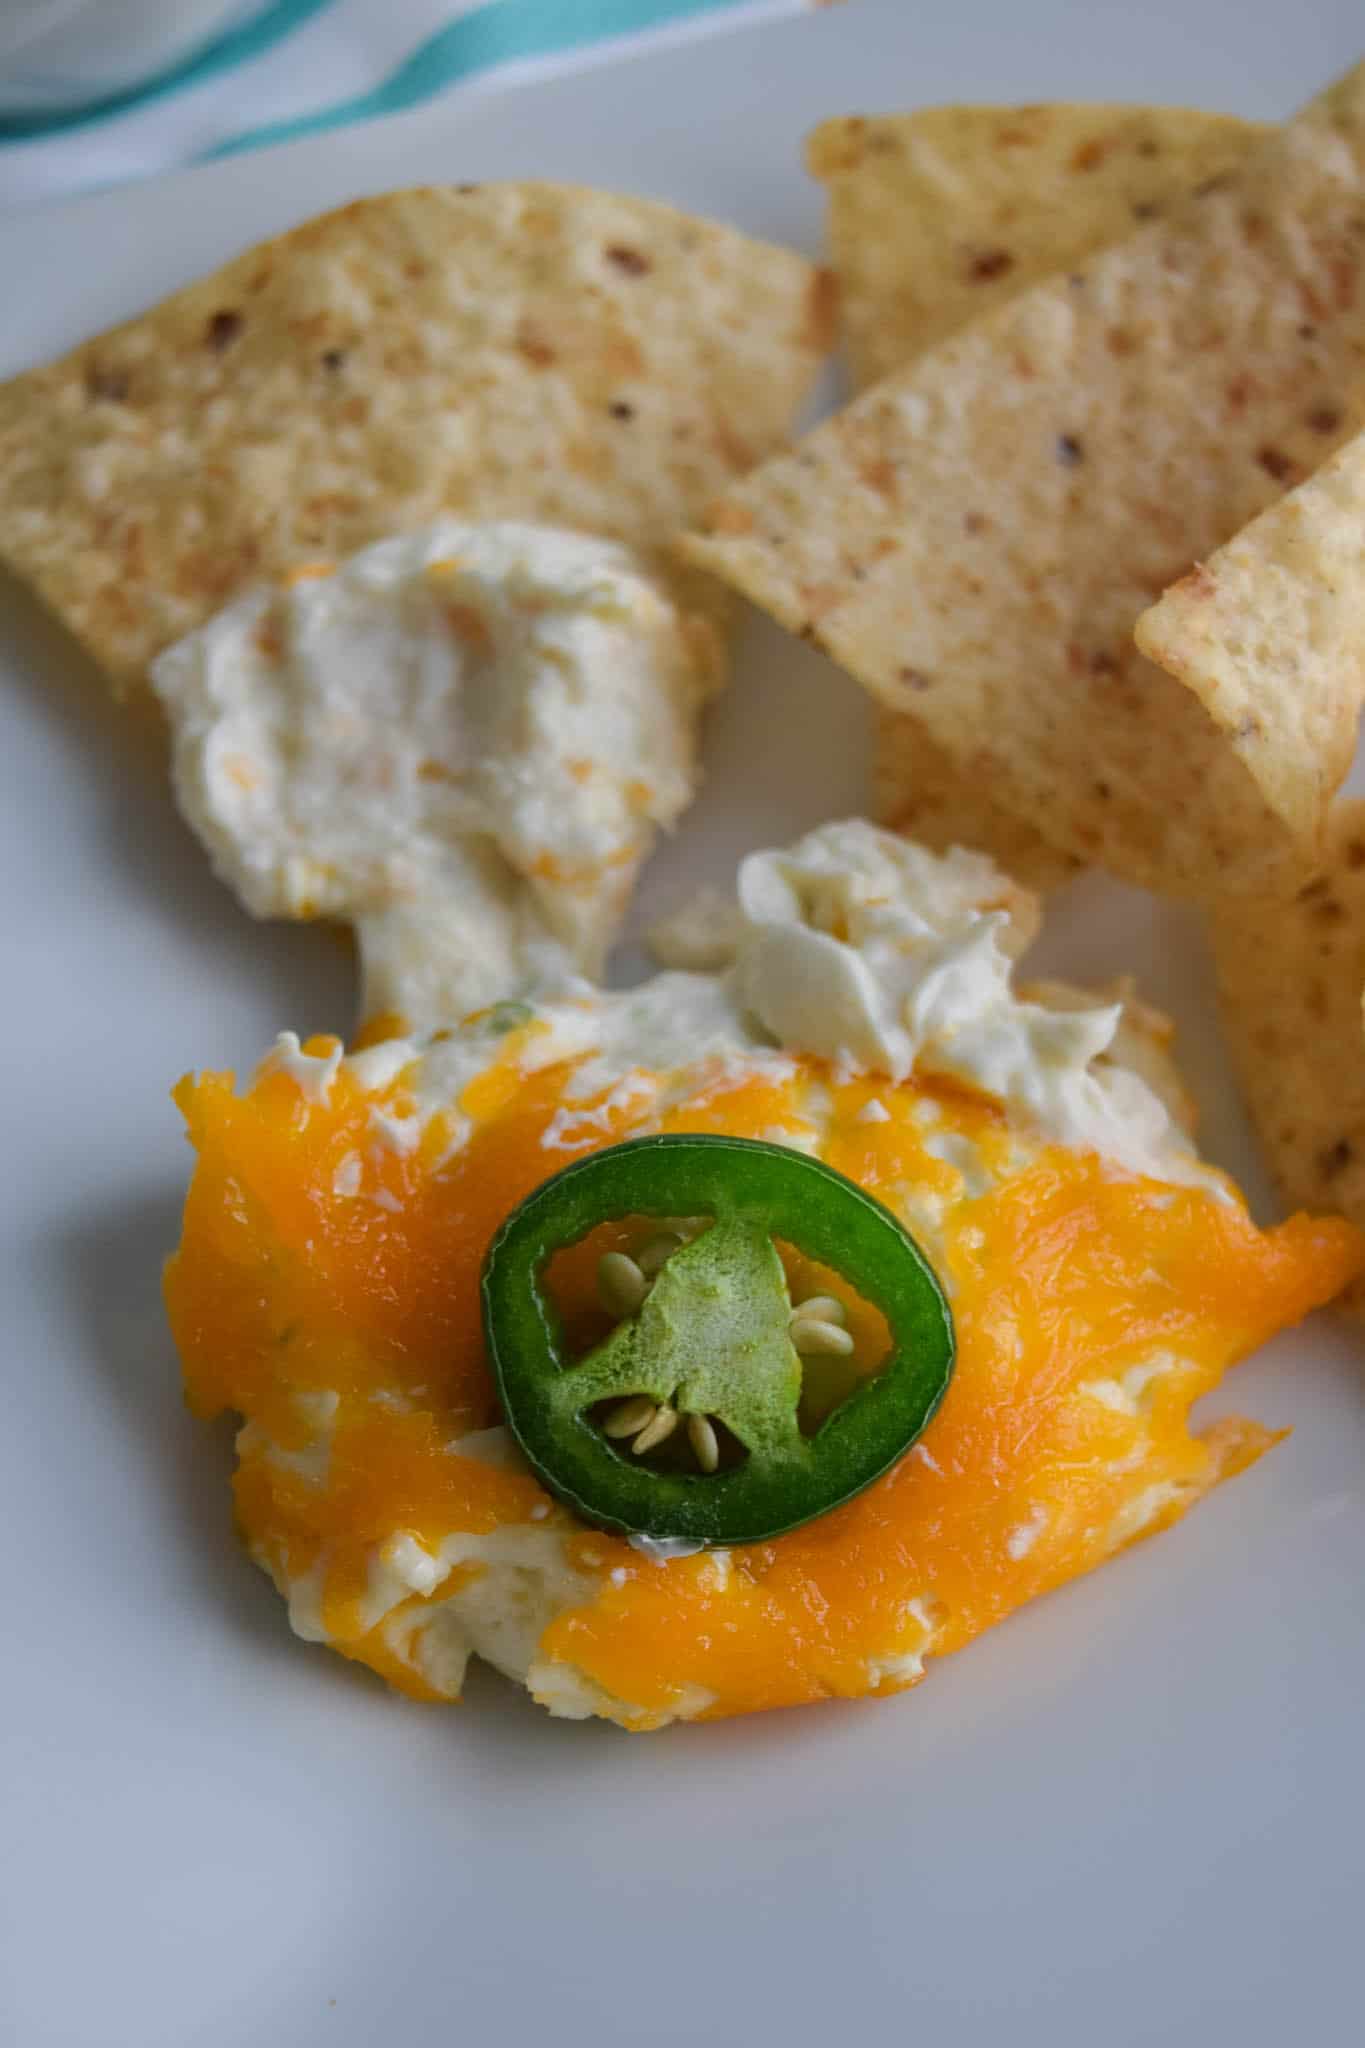 skinny jalapeno pepper dip served on plate with tortilla chips